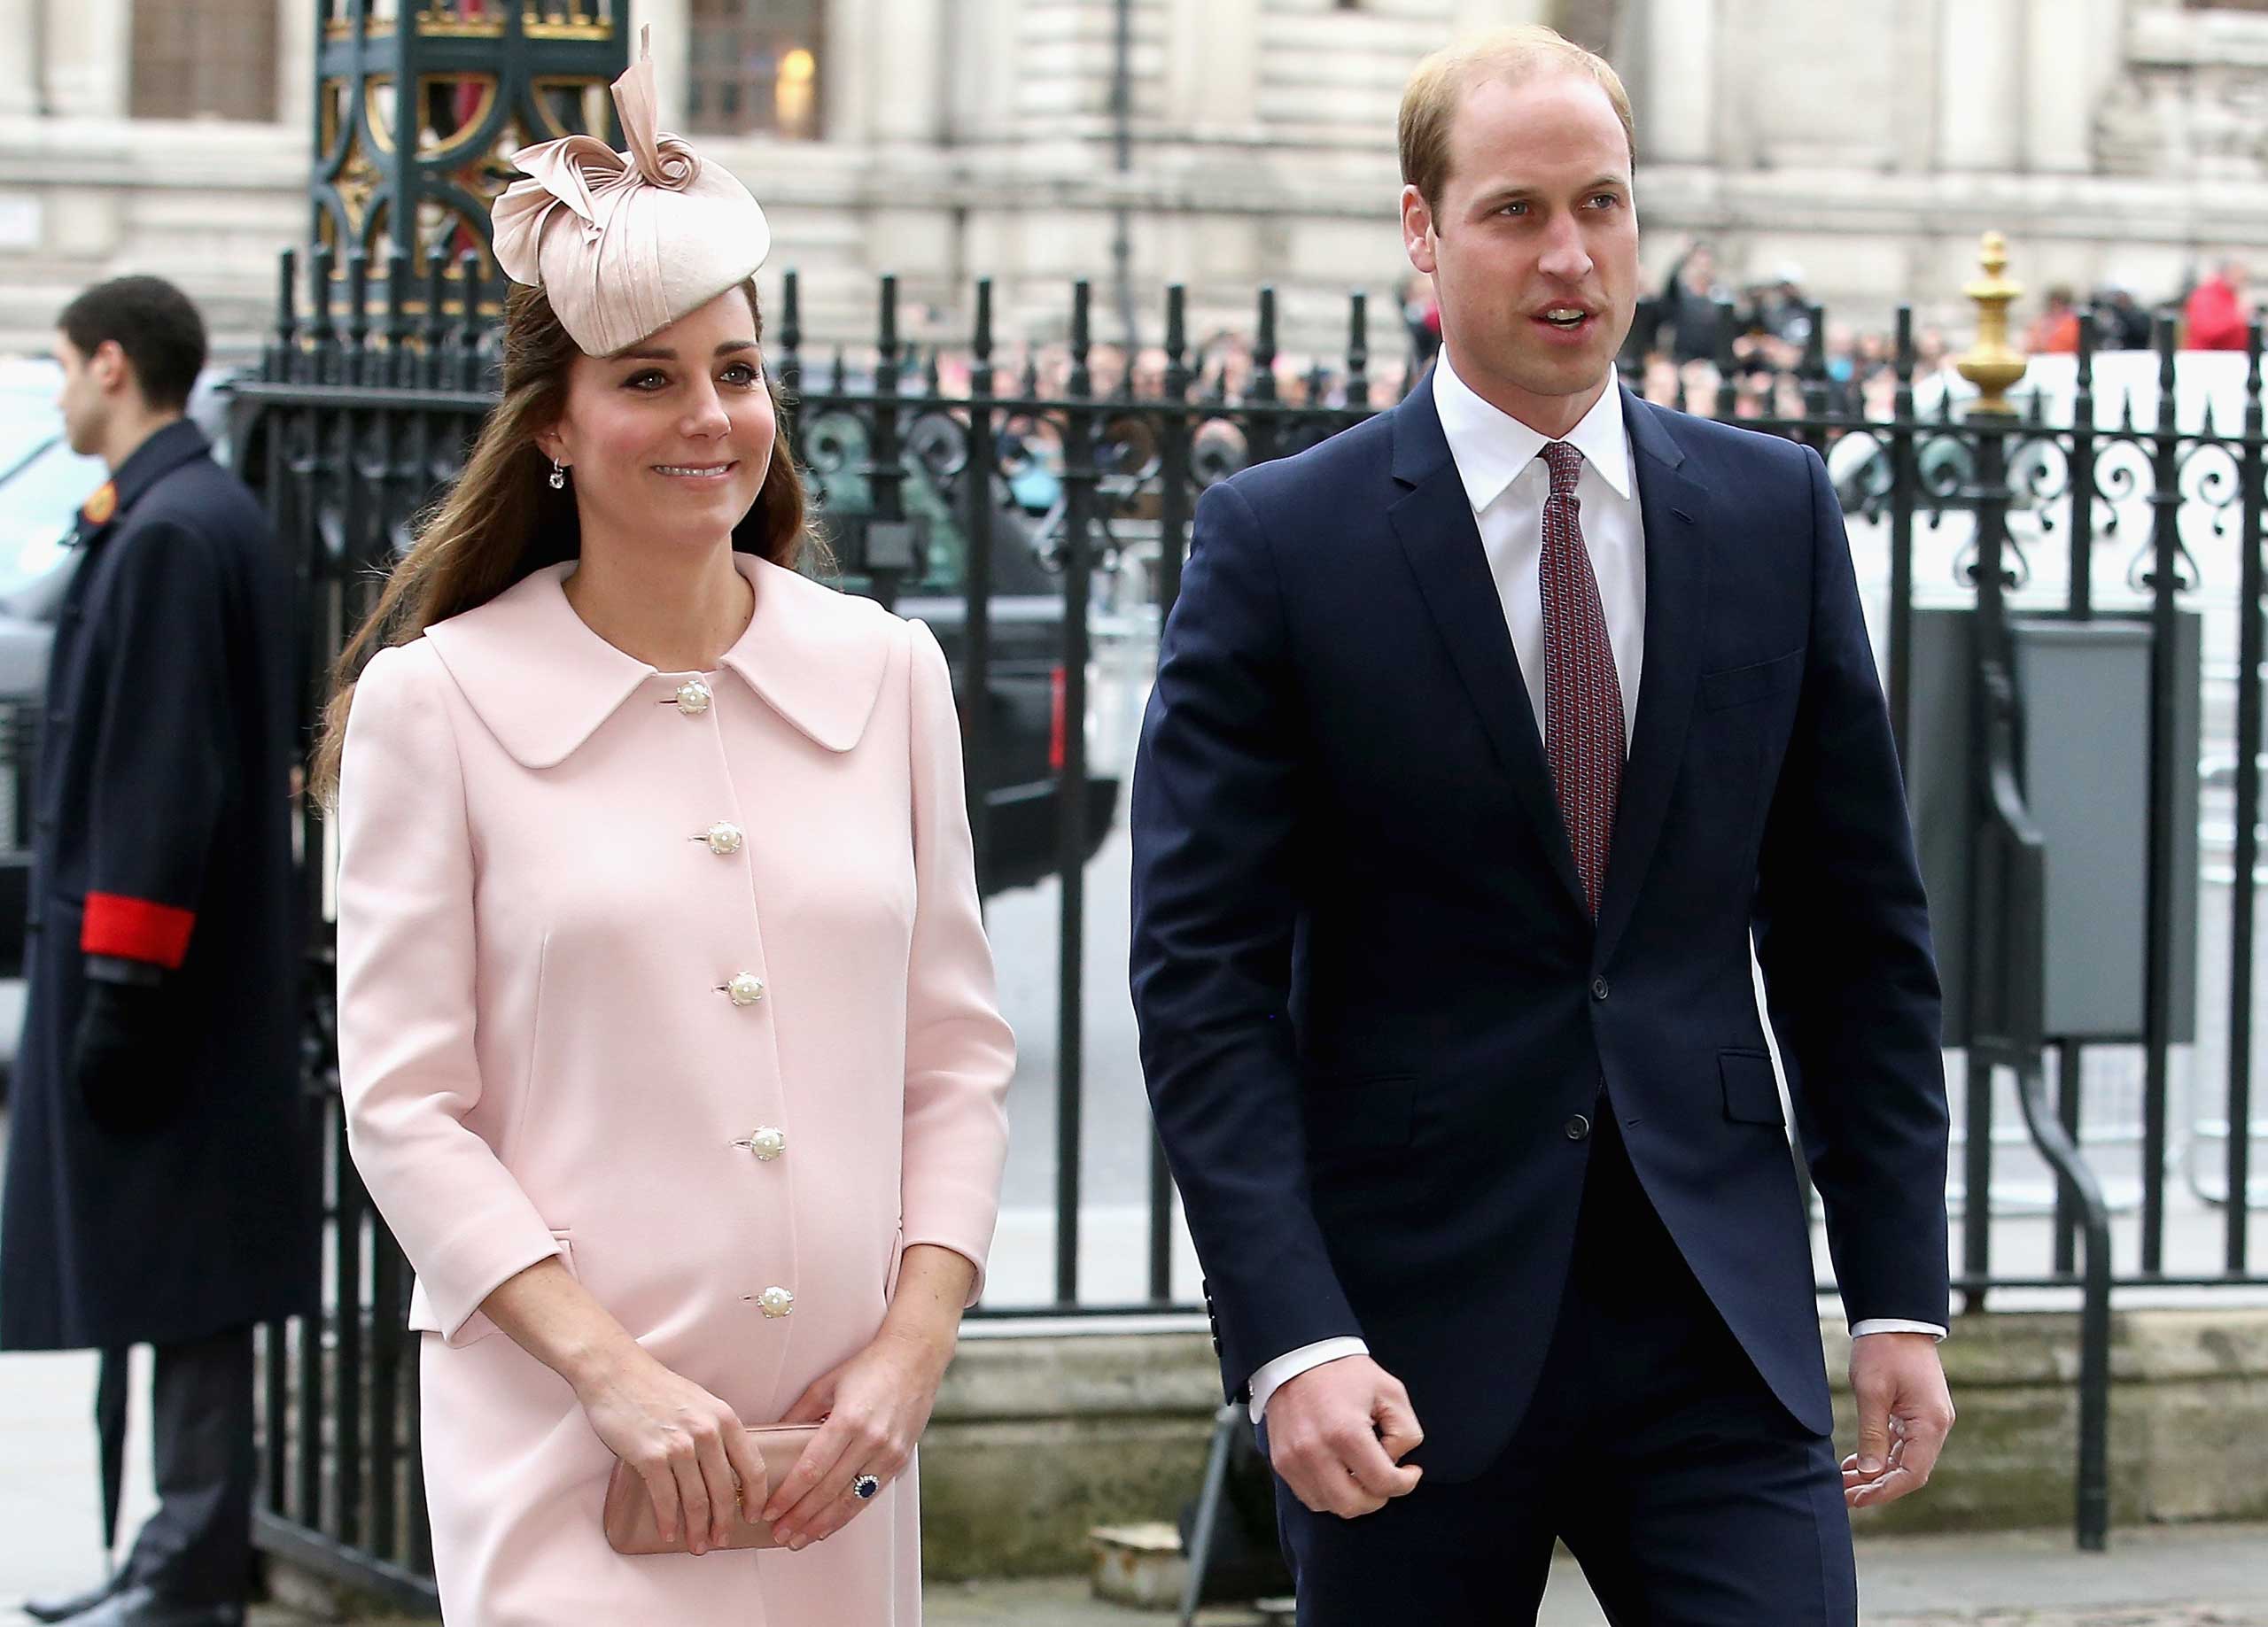 Catherine, Duchess of Cambridge and Prince William, Duke of Cambridge attend the Observance for Commonwealth Day Service At Westminster Abbey in London on March 9, 2015.